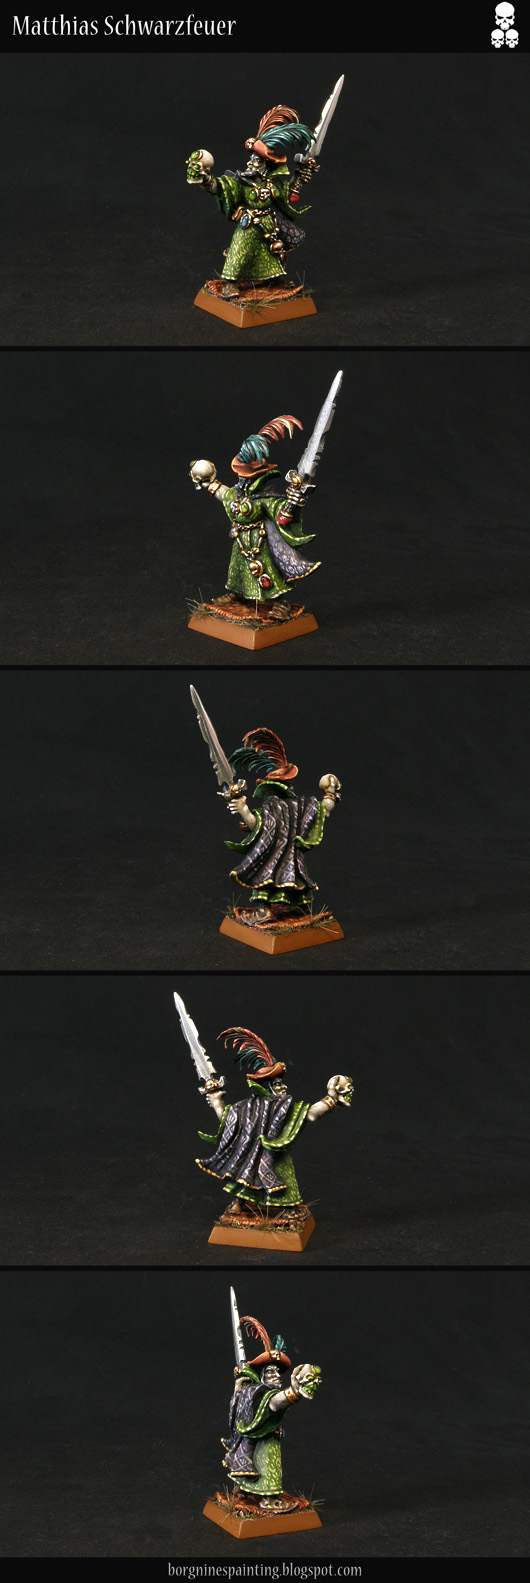 Old metal Necromancer miniature from Games Workshop, seen from several angles, converted and painted to be really extravagant and flamboyant, with a feathered hat and intricate, freehanded designs on his robes and cloak. He is usable in Warhammer Fantasy Battle (WFB) or Age of Sigmar (AoS).